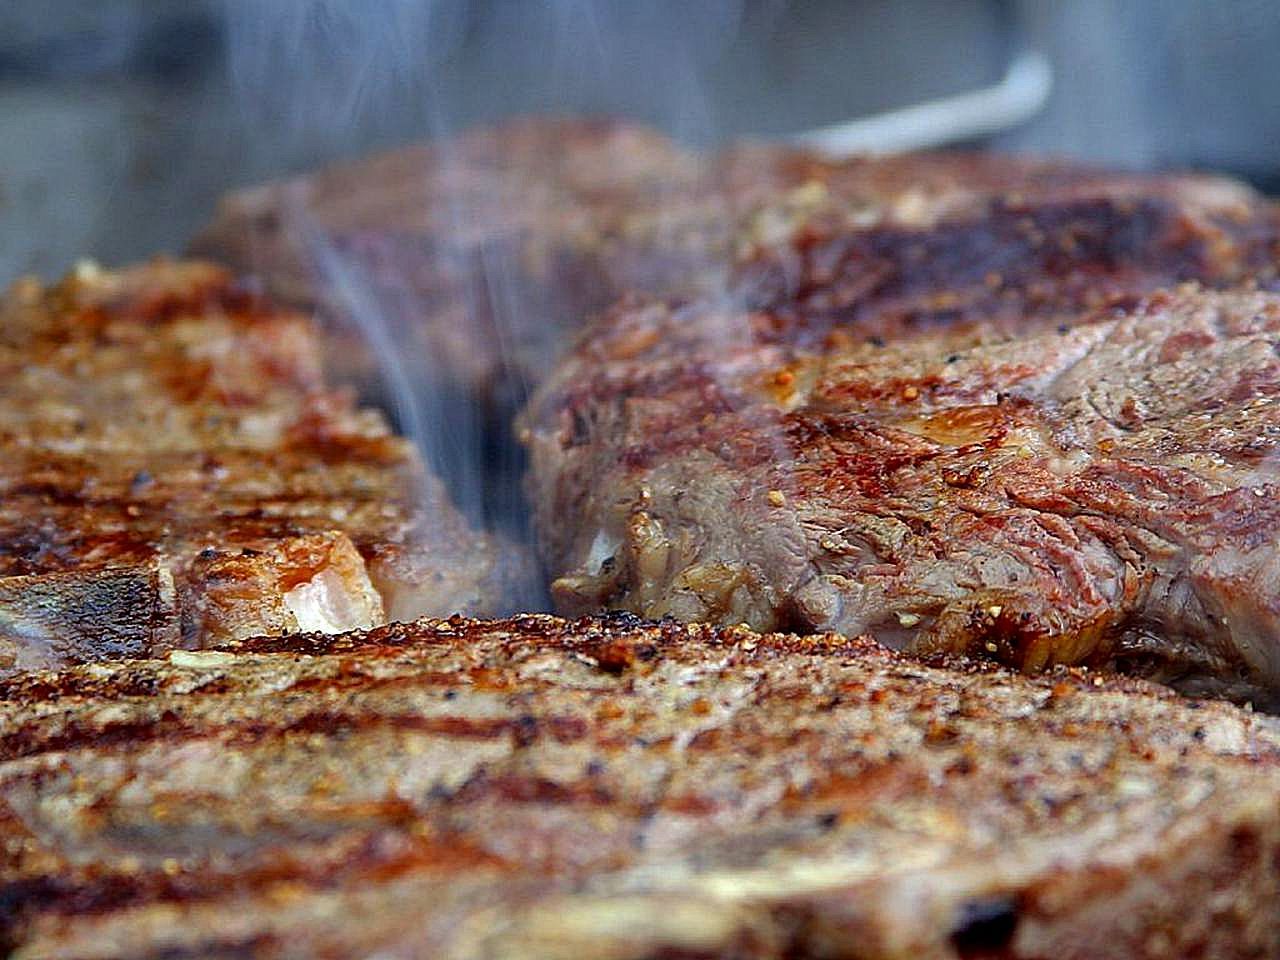 Free picture: steaks, beef, grilling, grilled, smoke, smokey meat